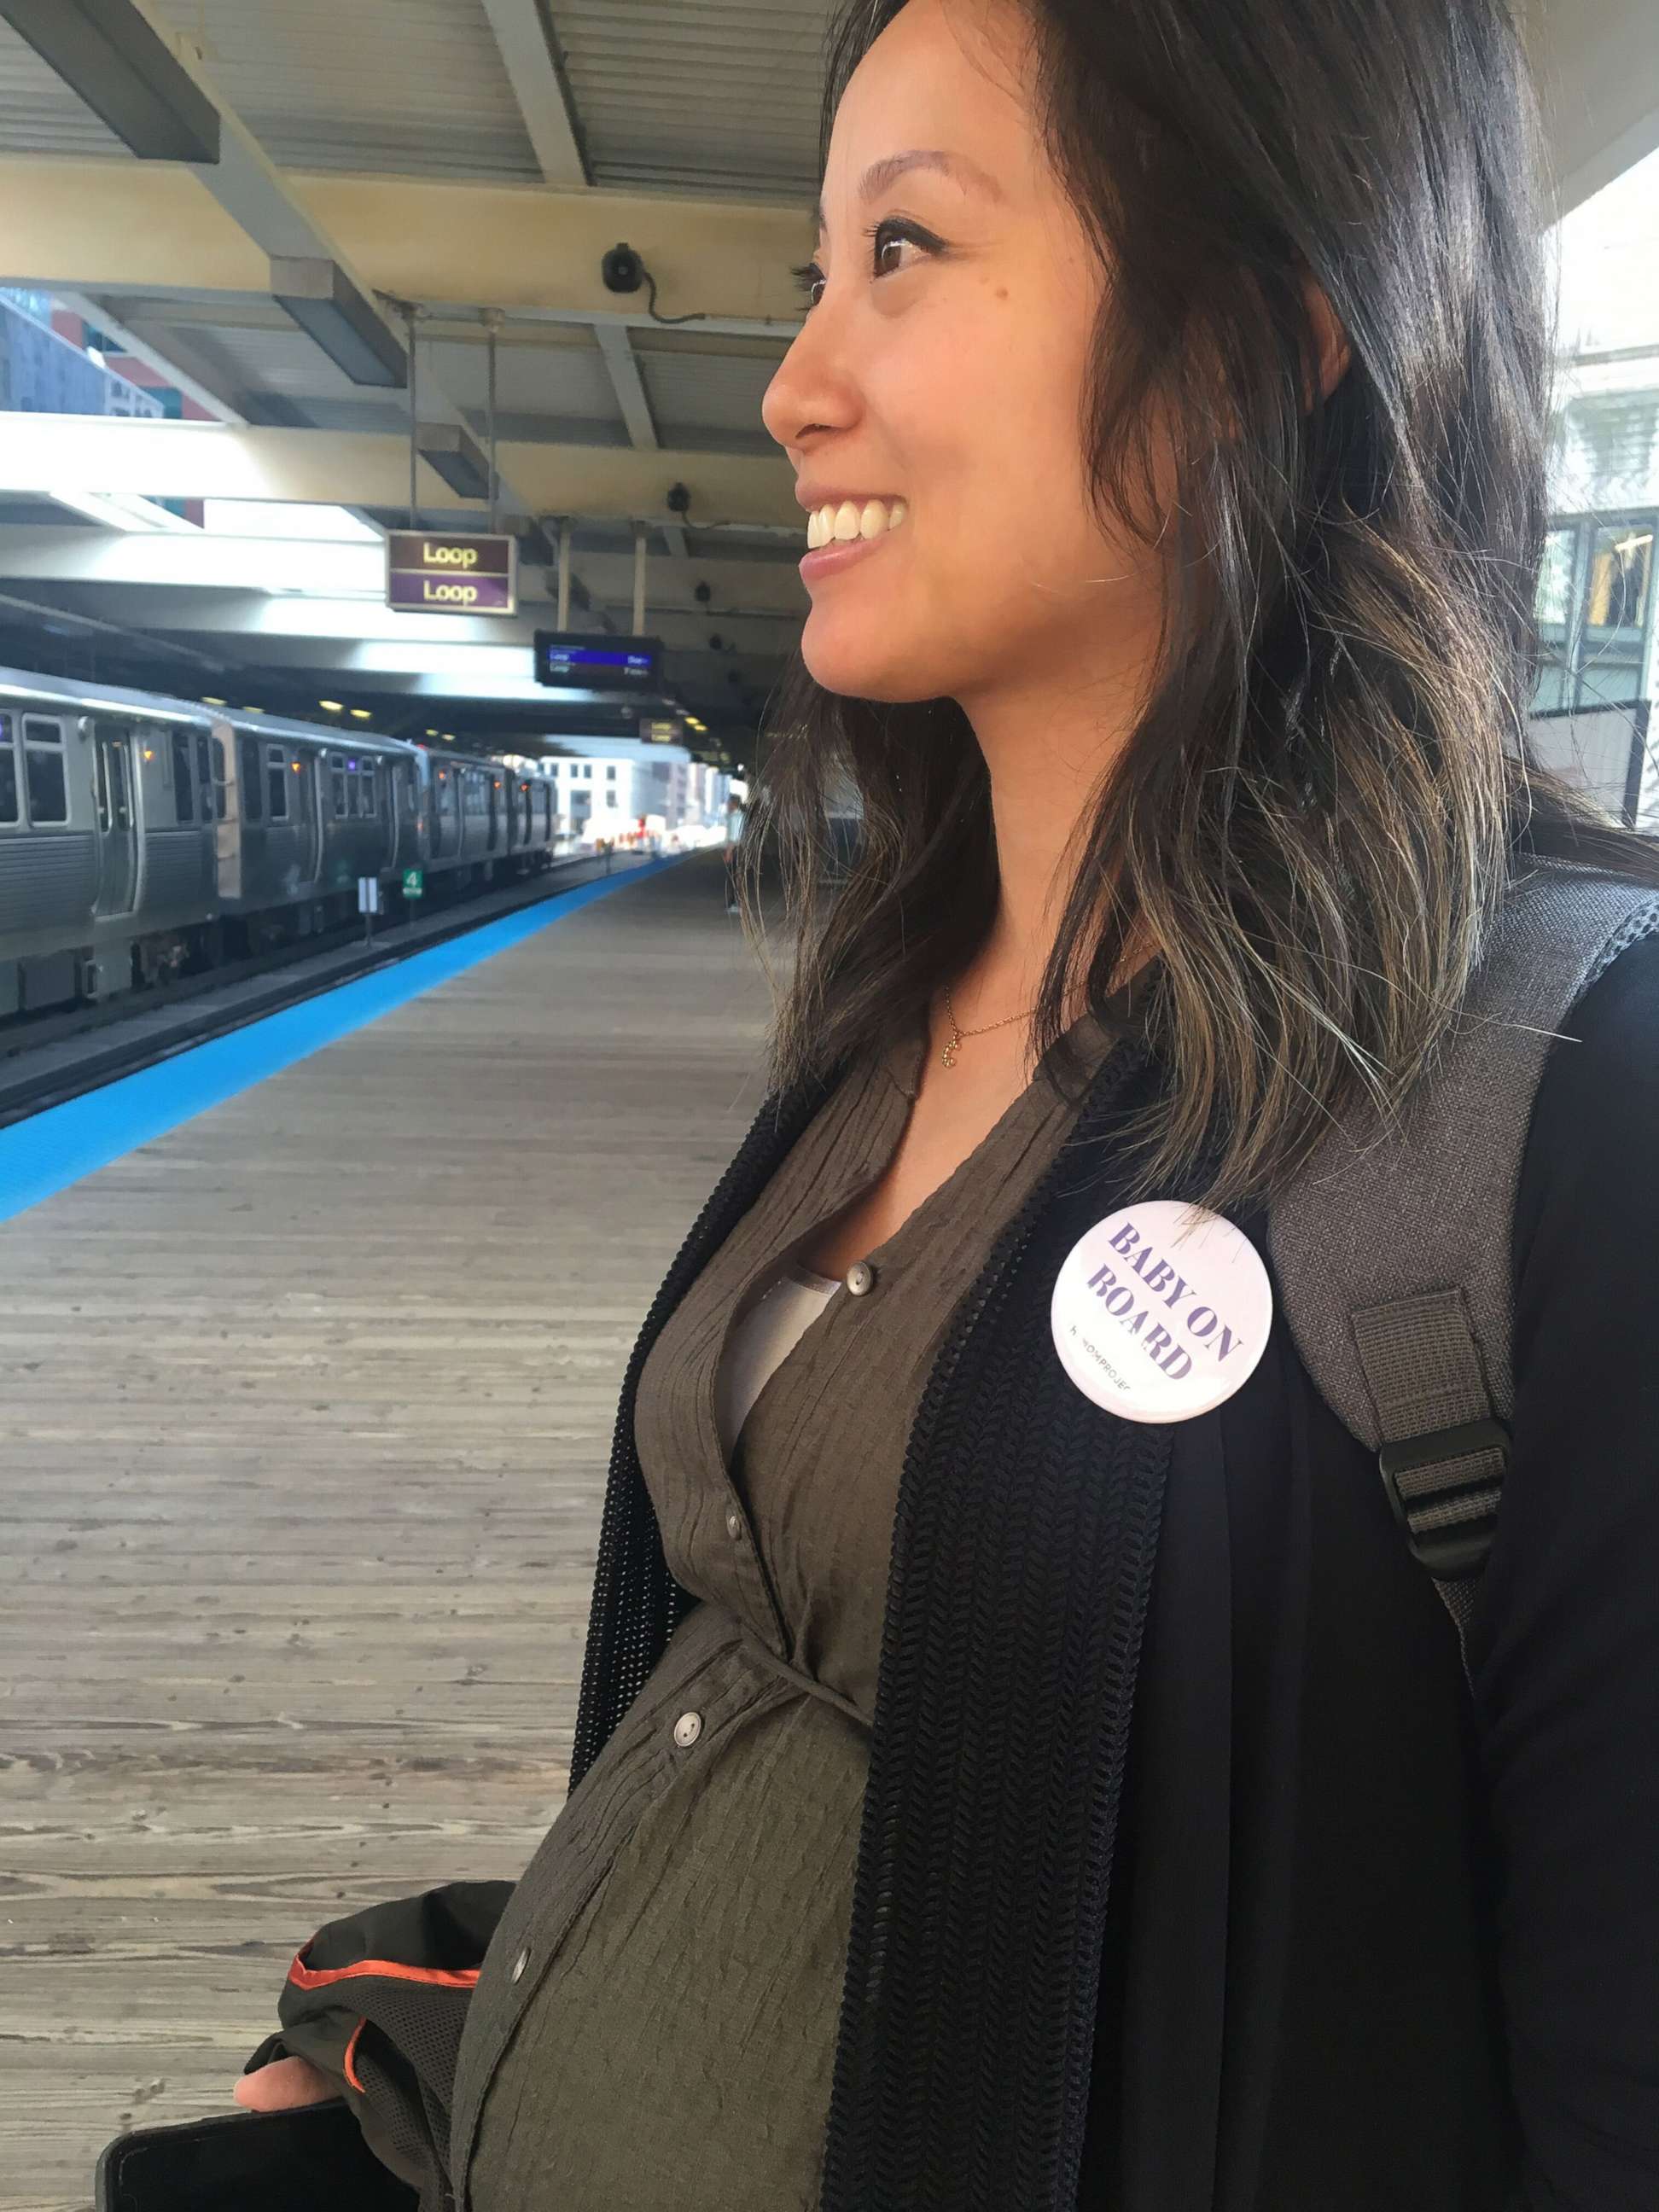 PHOTO: The Mom Project, a Chicago company, is handing out "Baby on Board" buttons for pregnant riders of the Chicago Transit Authority (CTA).